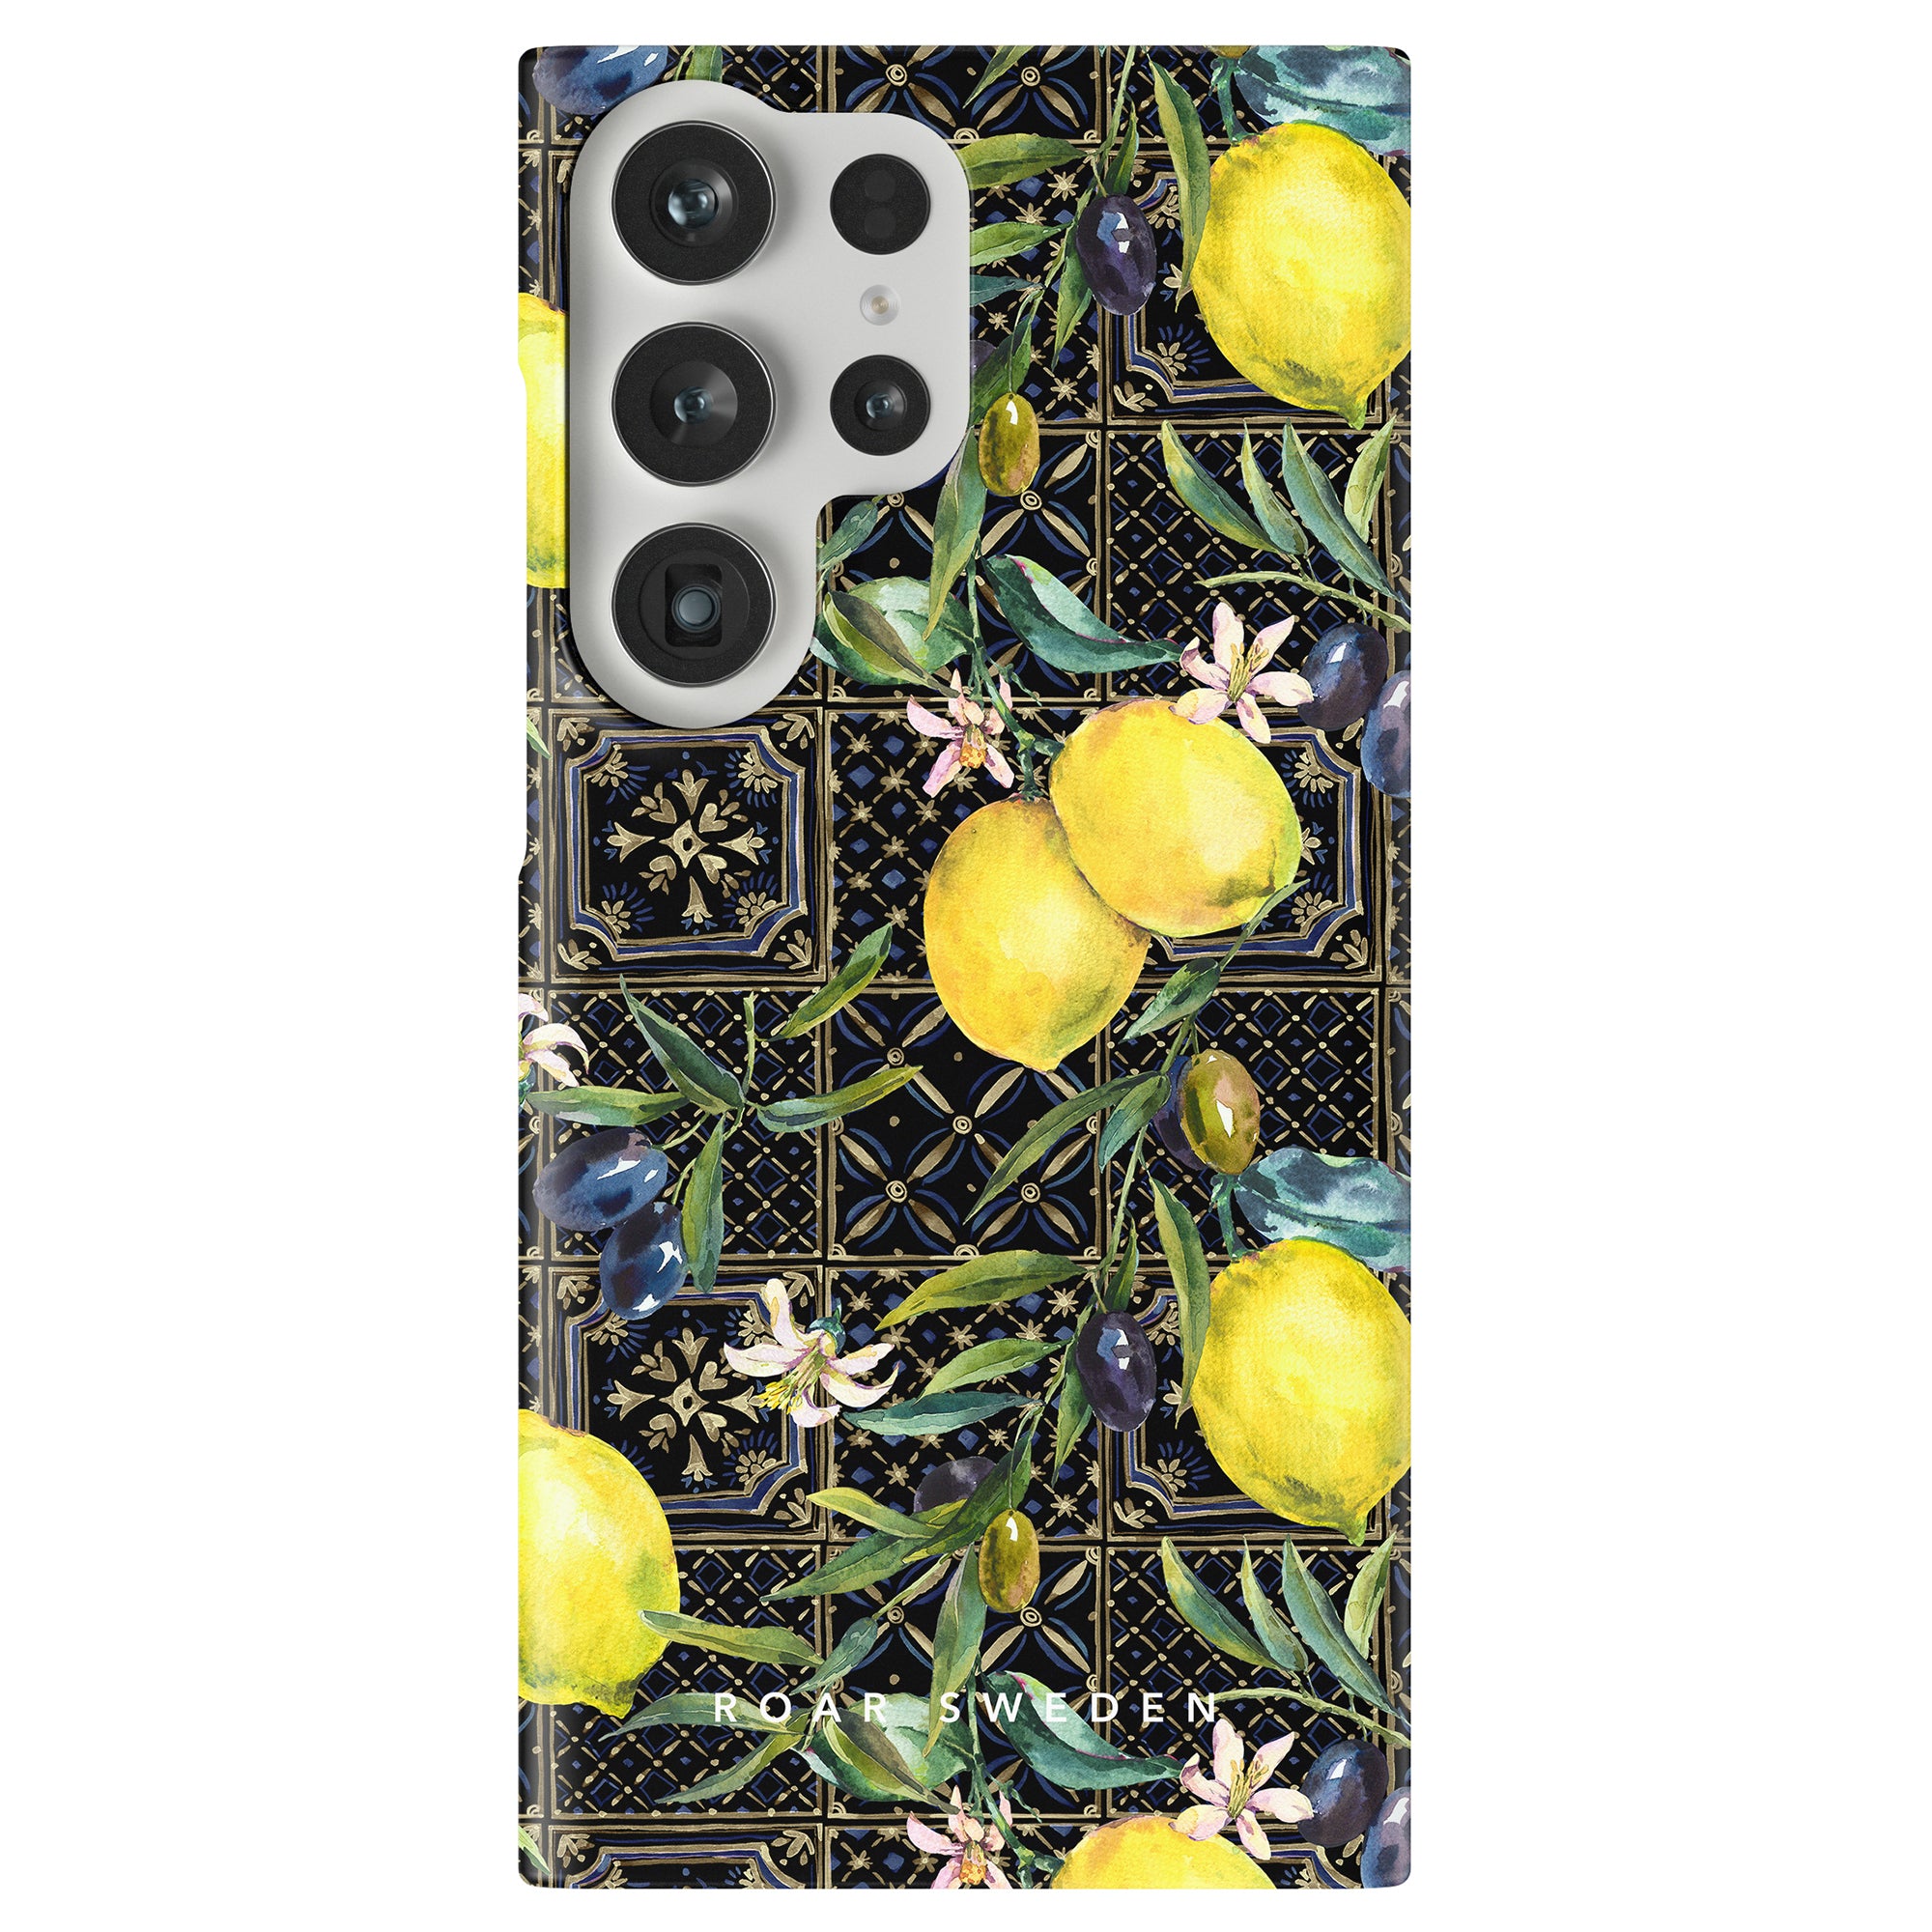 Sorrento - Slim case with lemon and floral motif on a patterned background, incorporating natural ingredients.